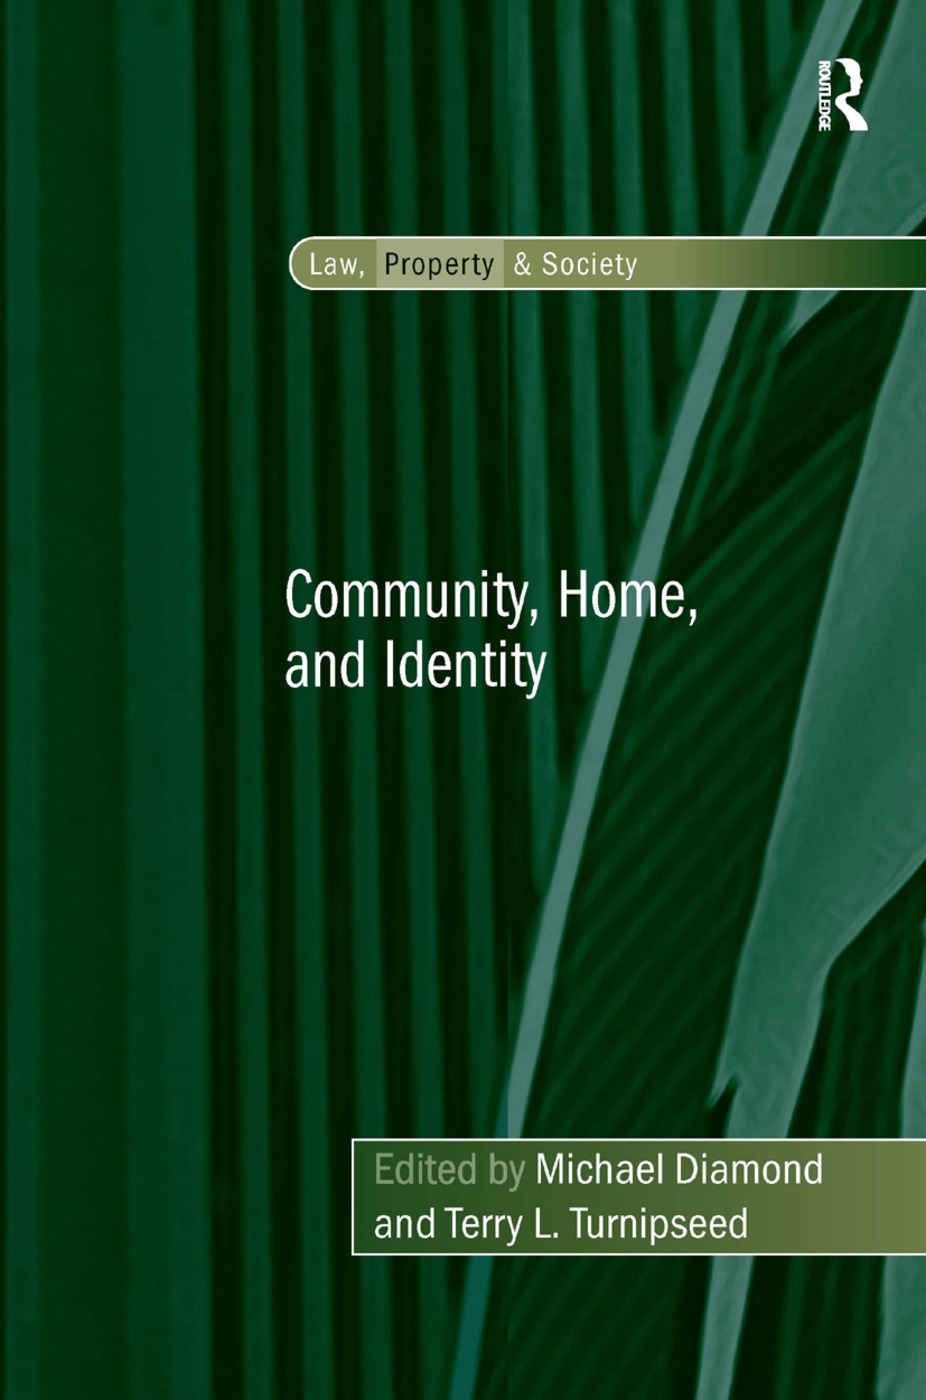 Community, Home, and Identity. Edited by Michael Diamond and Terry L. Turnipseed